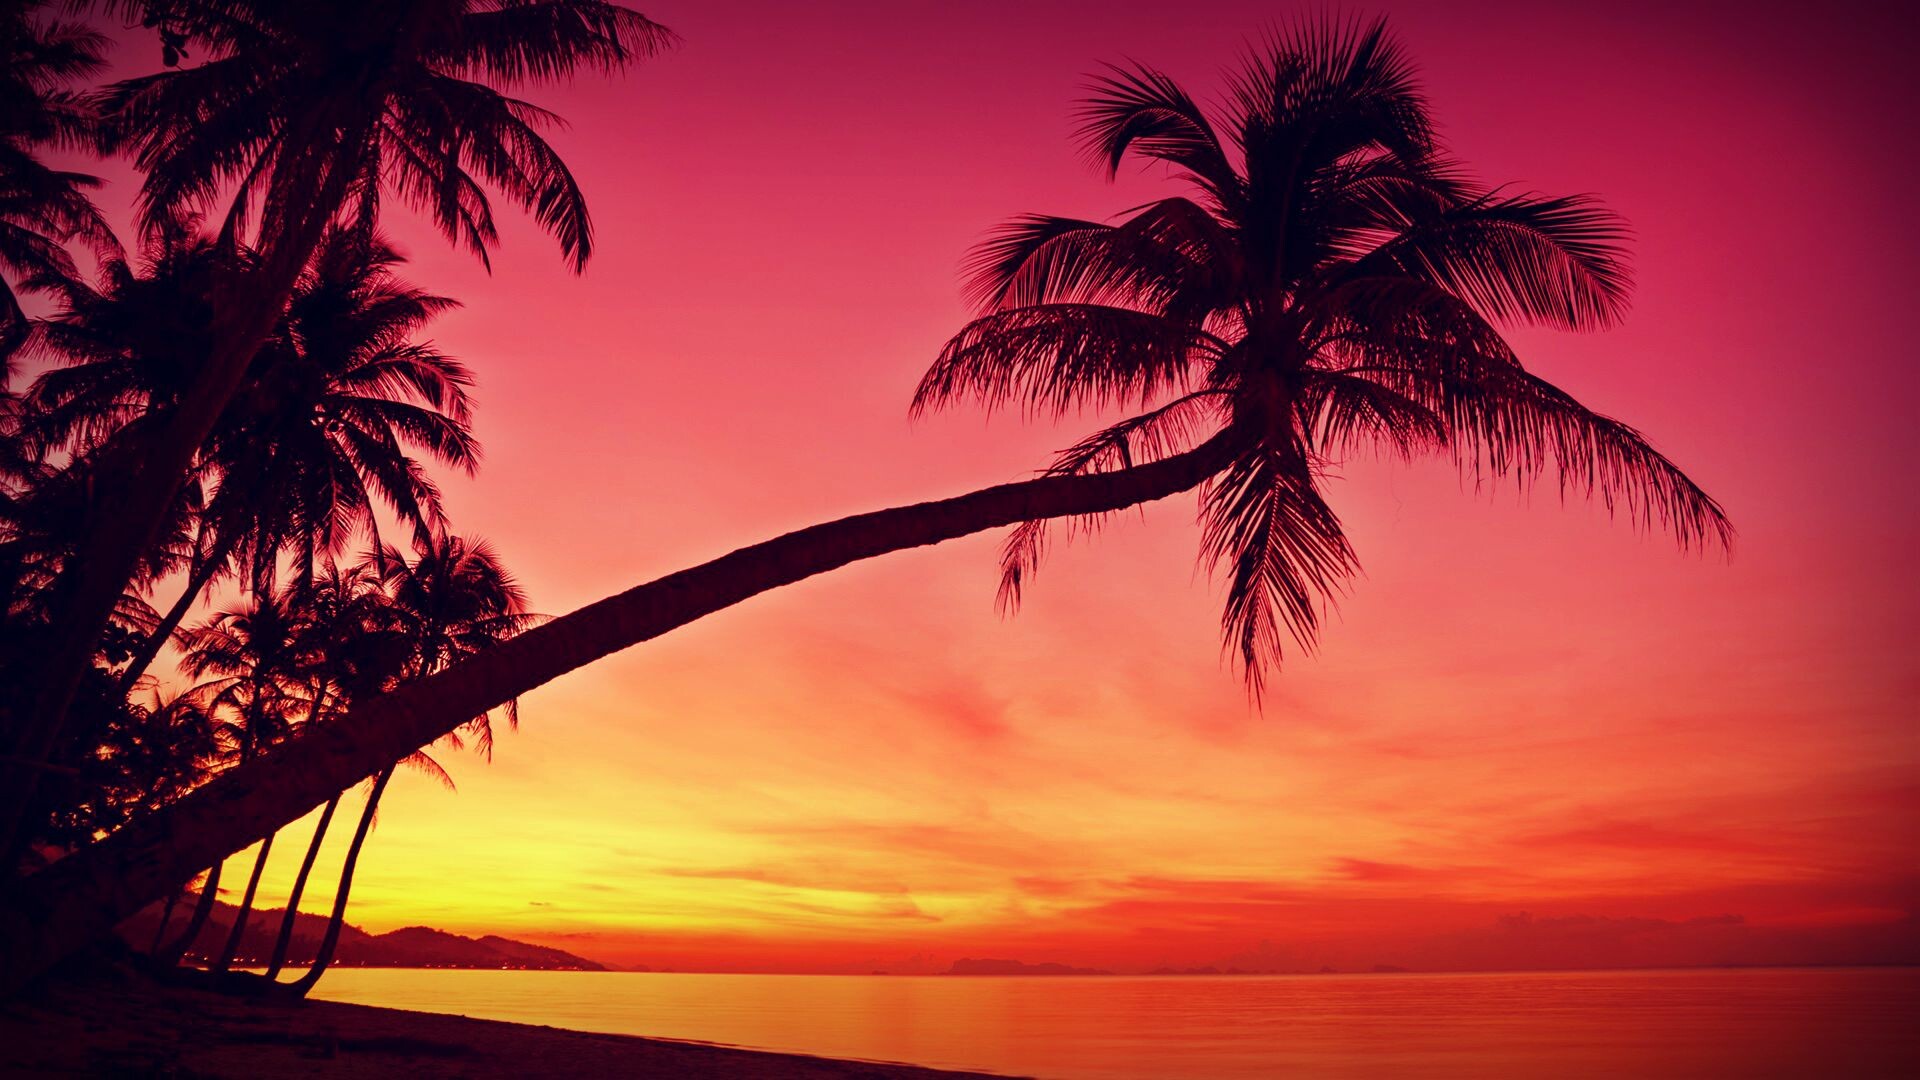 Palm Tree: A symbol of a classic tropical beach scene, Iconic tropical forest plants. 1920x1080 Full HD Background.